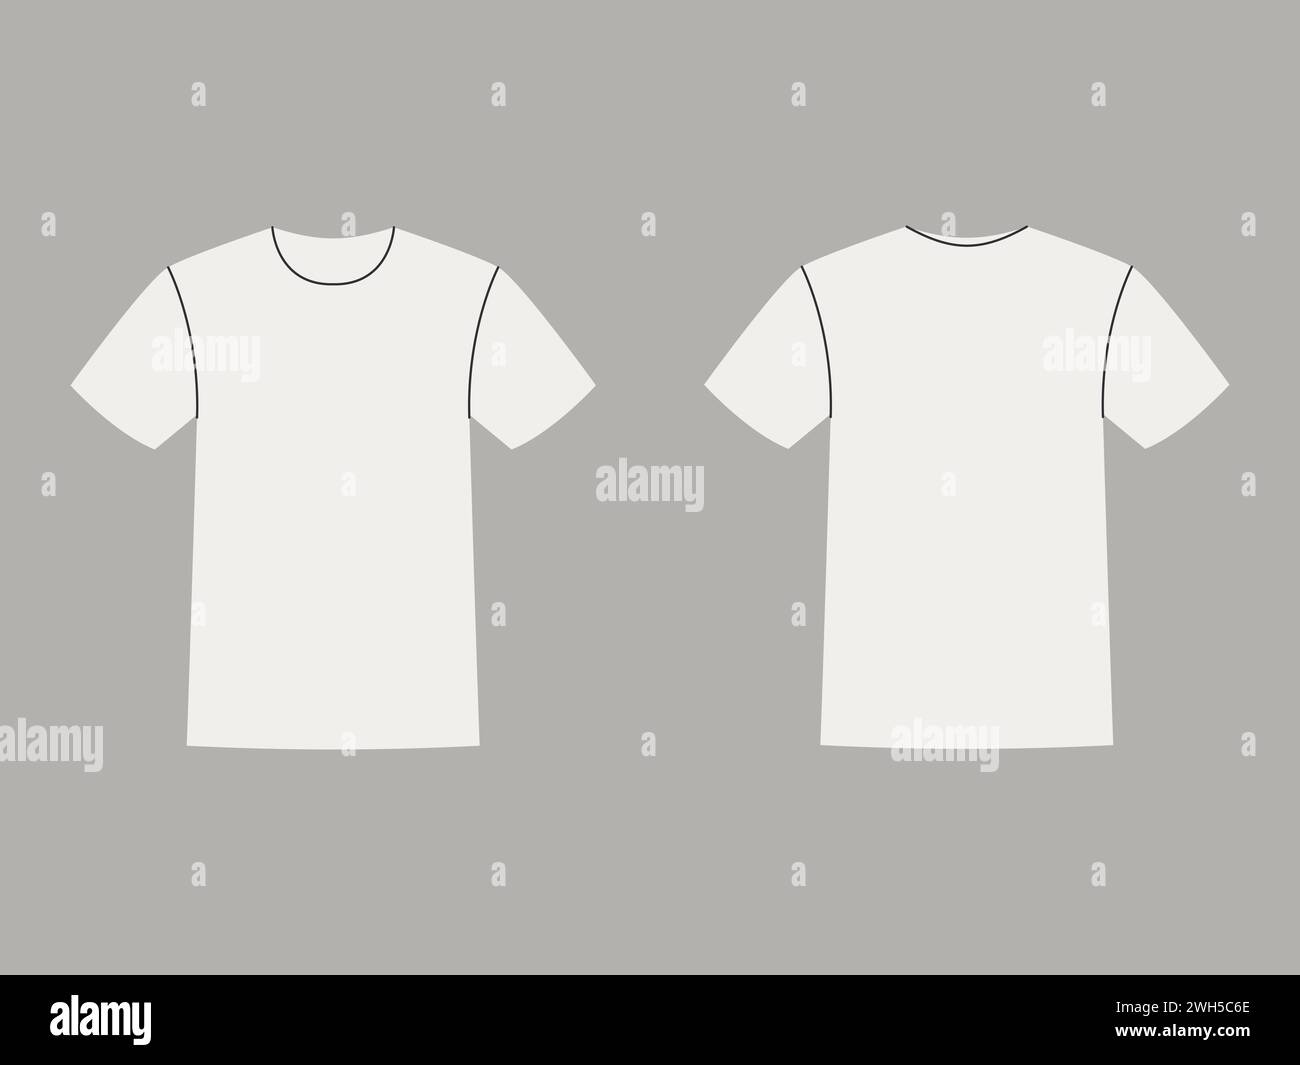 white color shirt front and back view clothes short sleeve garment casual fashion stylish template design 2WH5C6E